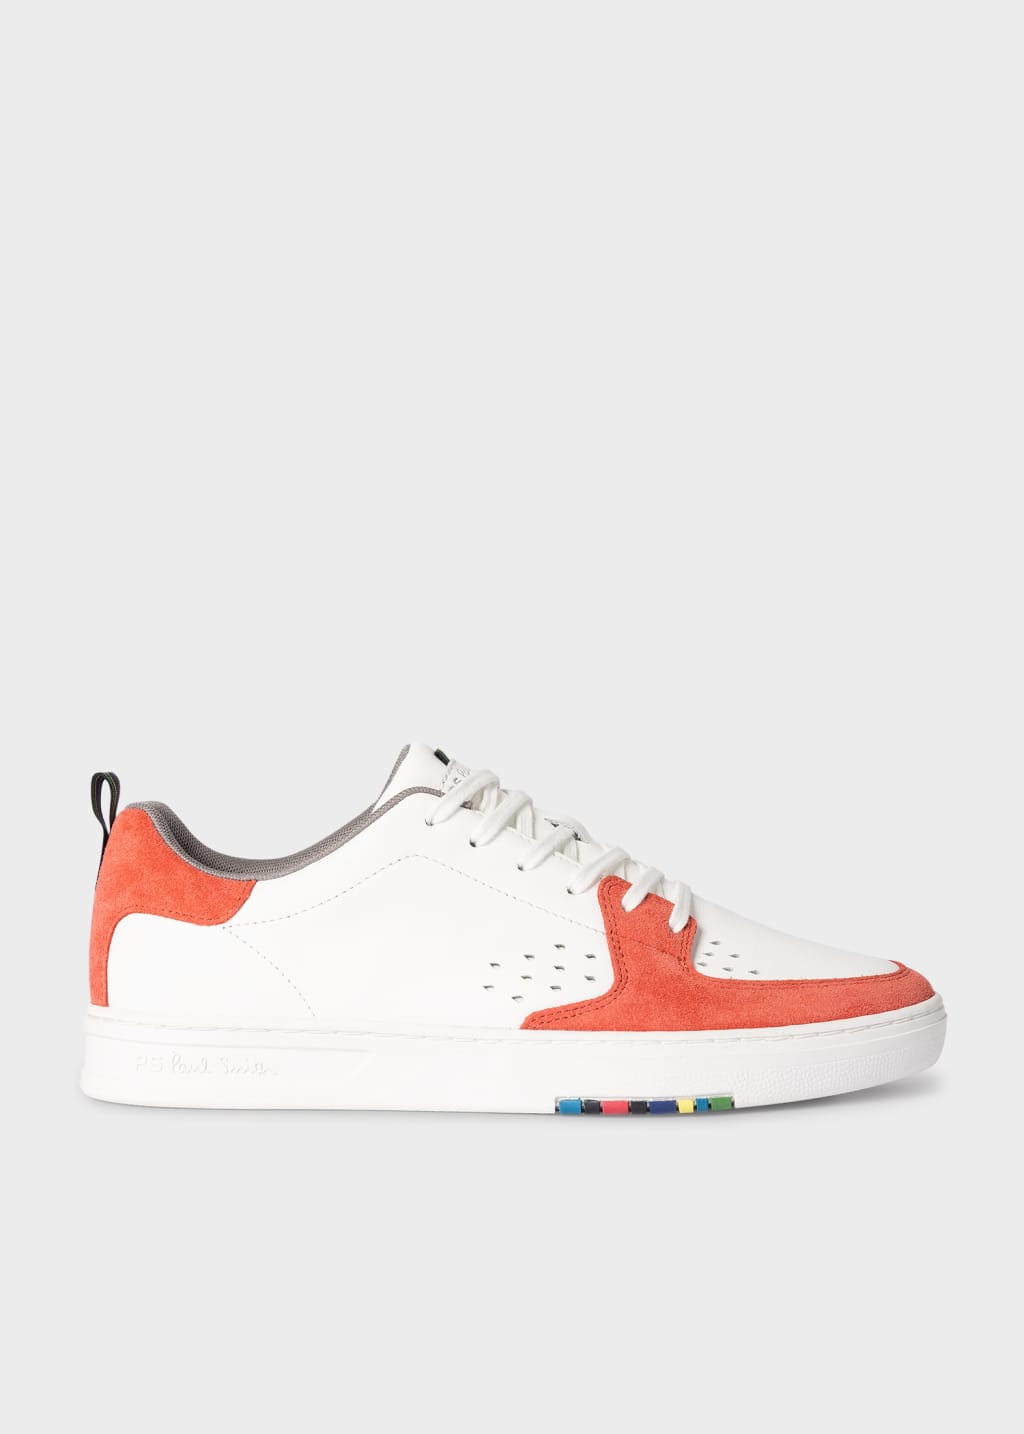 Side View - White and Coral 'Cosmo' Trainers Paul Smith